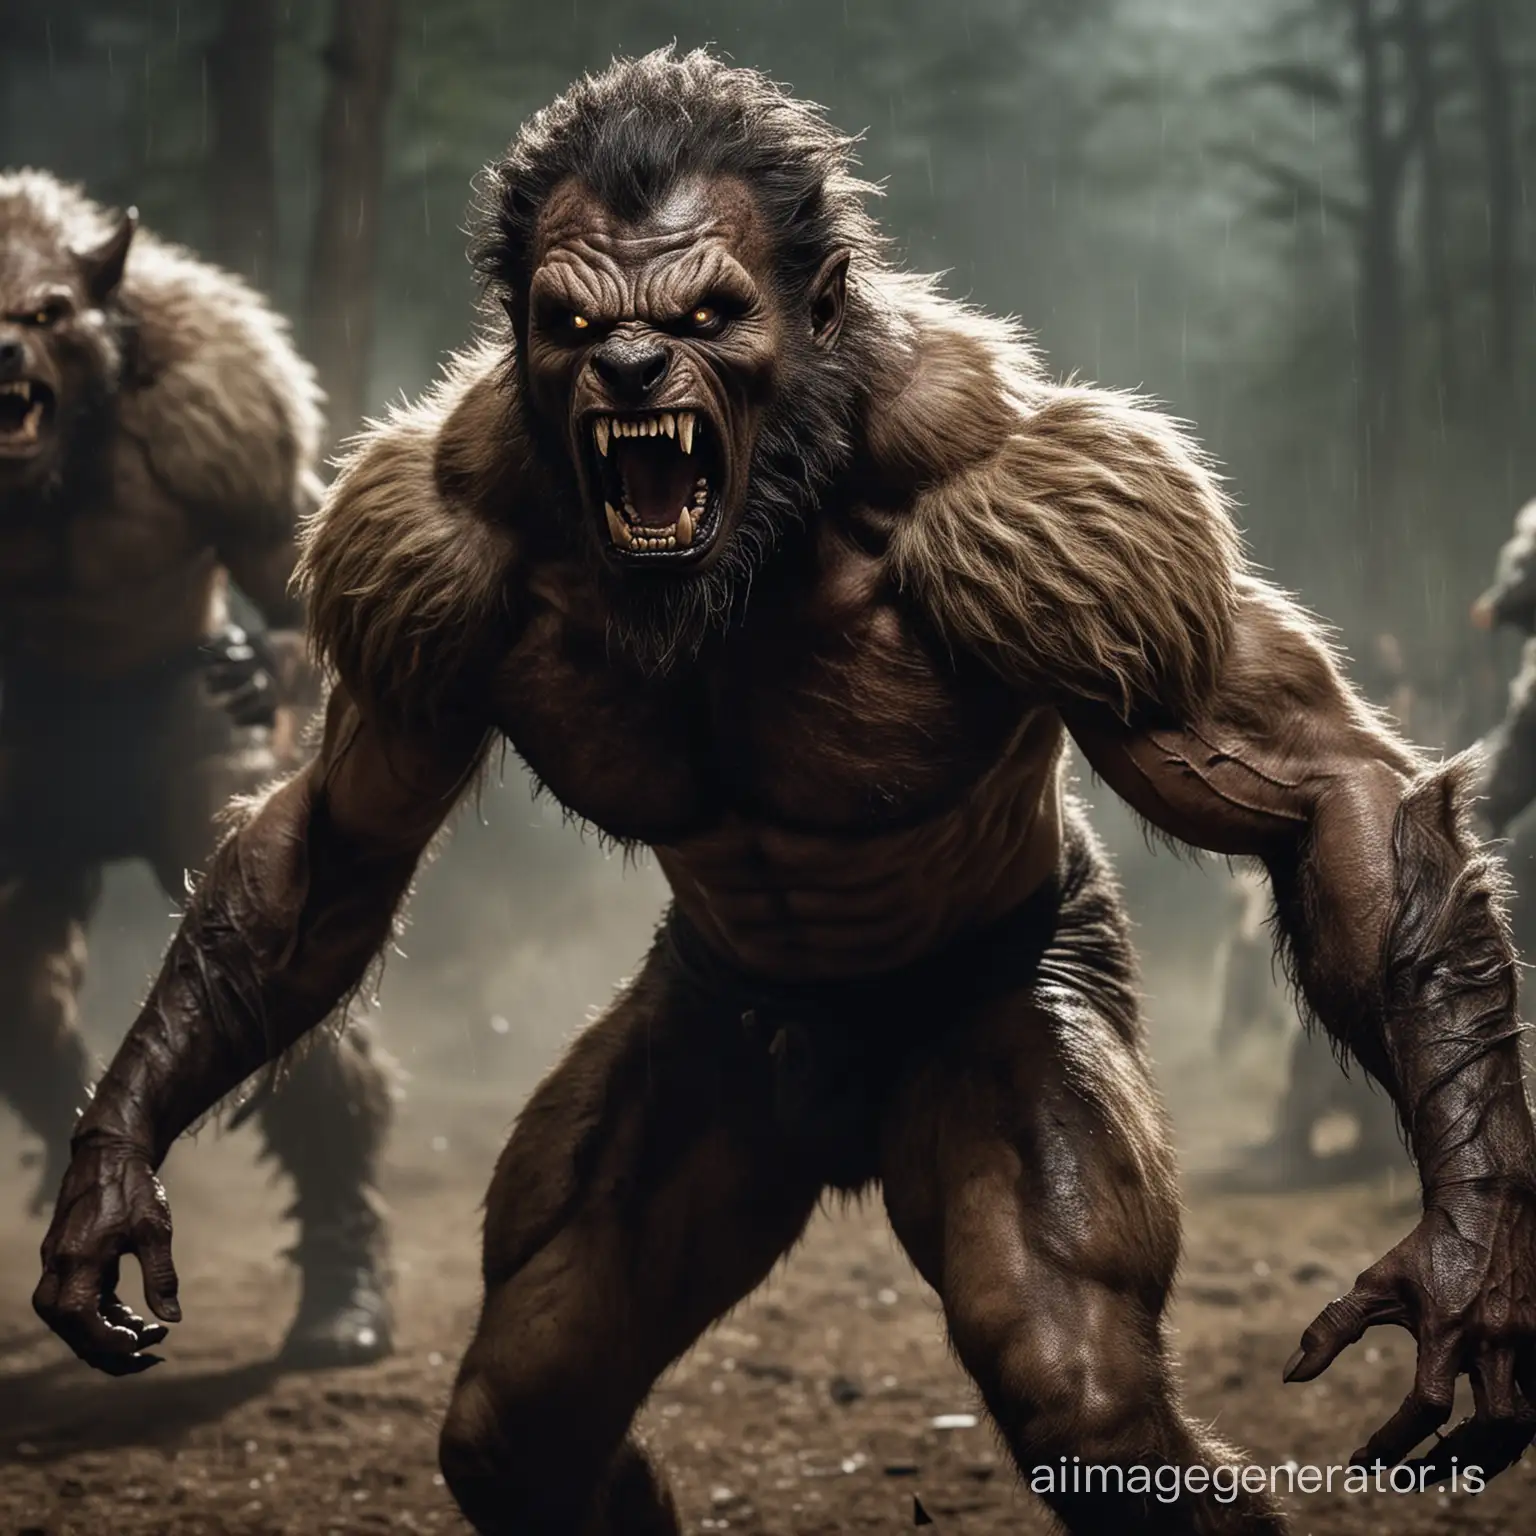 American-Football-Players-MidTransformation-Attacked-by-Werewolf